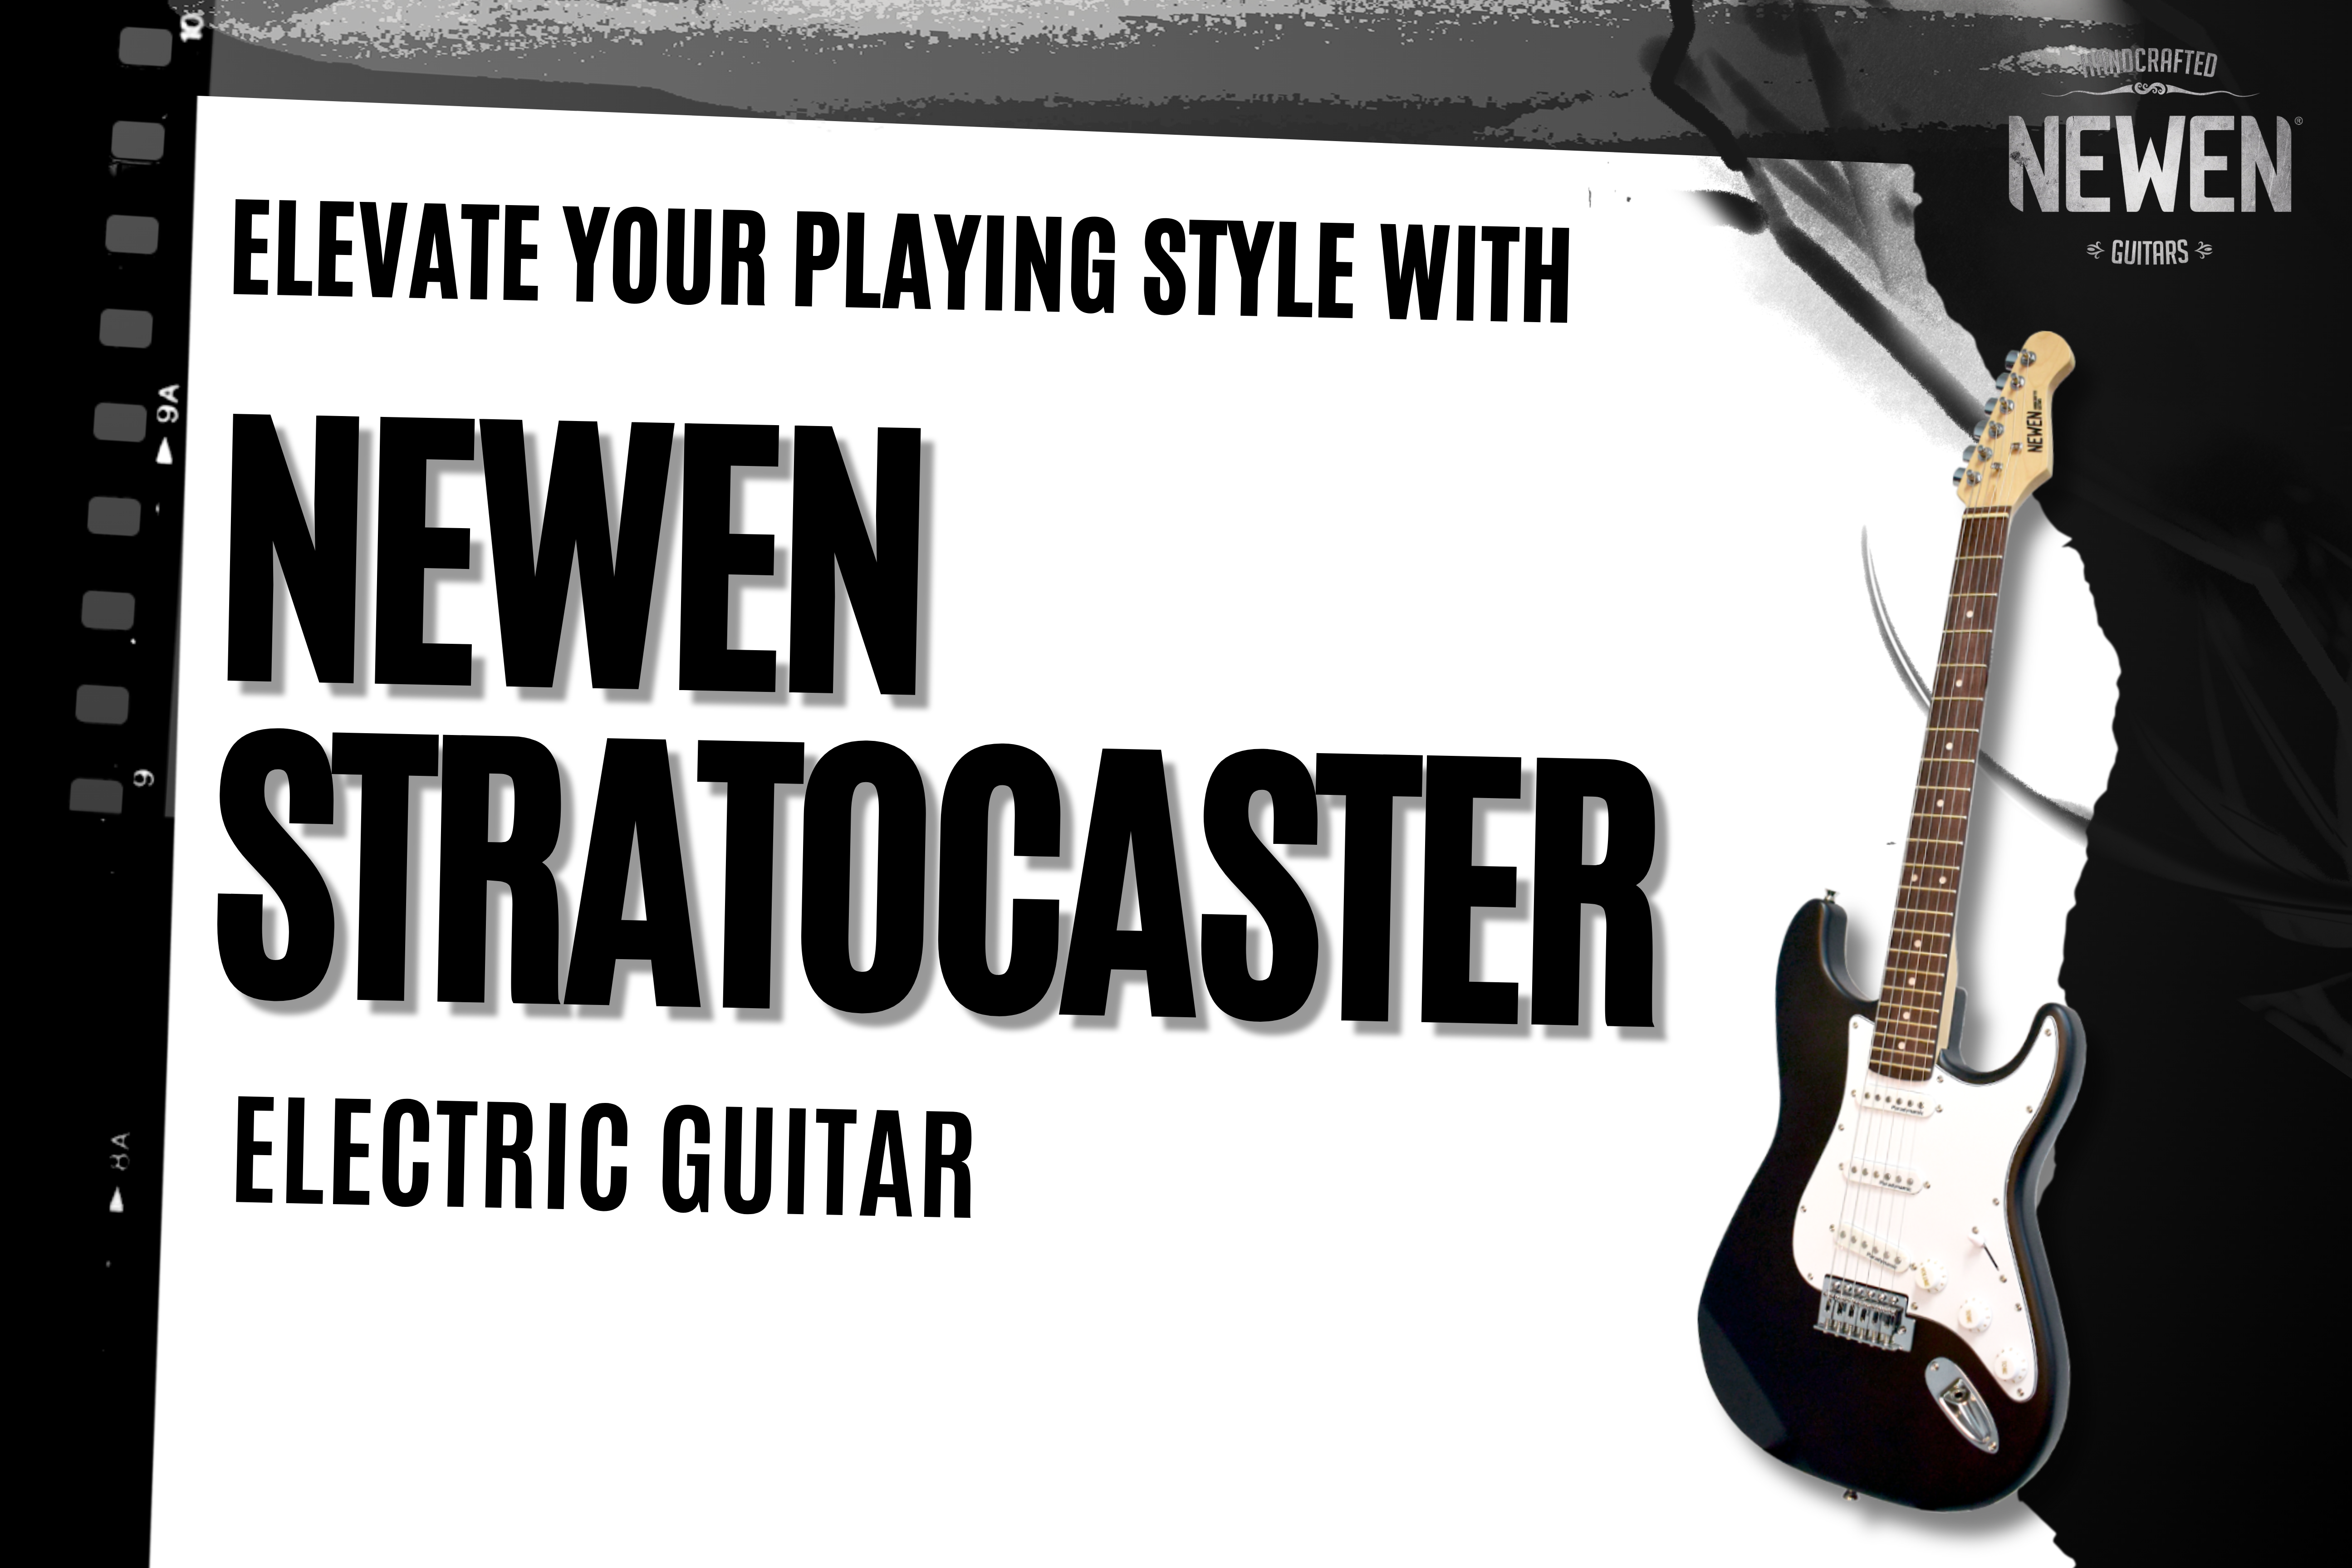 Elevate Your Playing Style With Newen Stratocaster Guitars